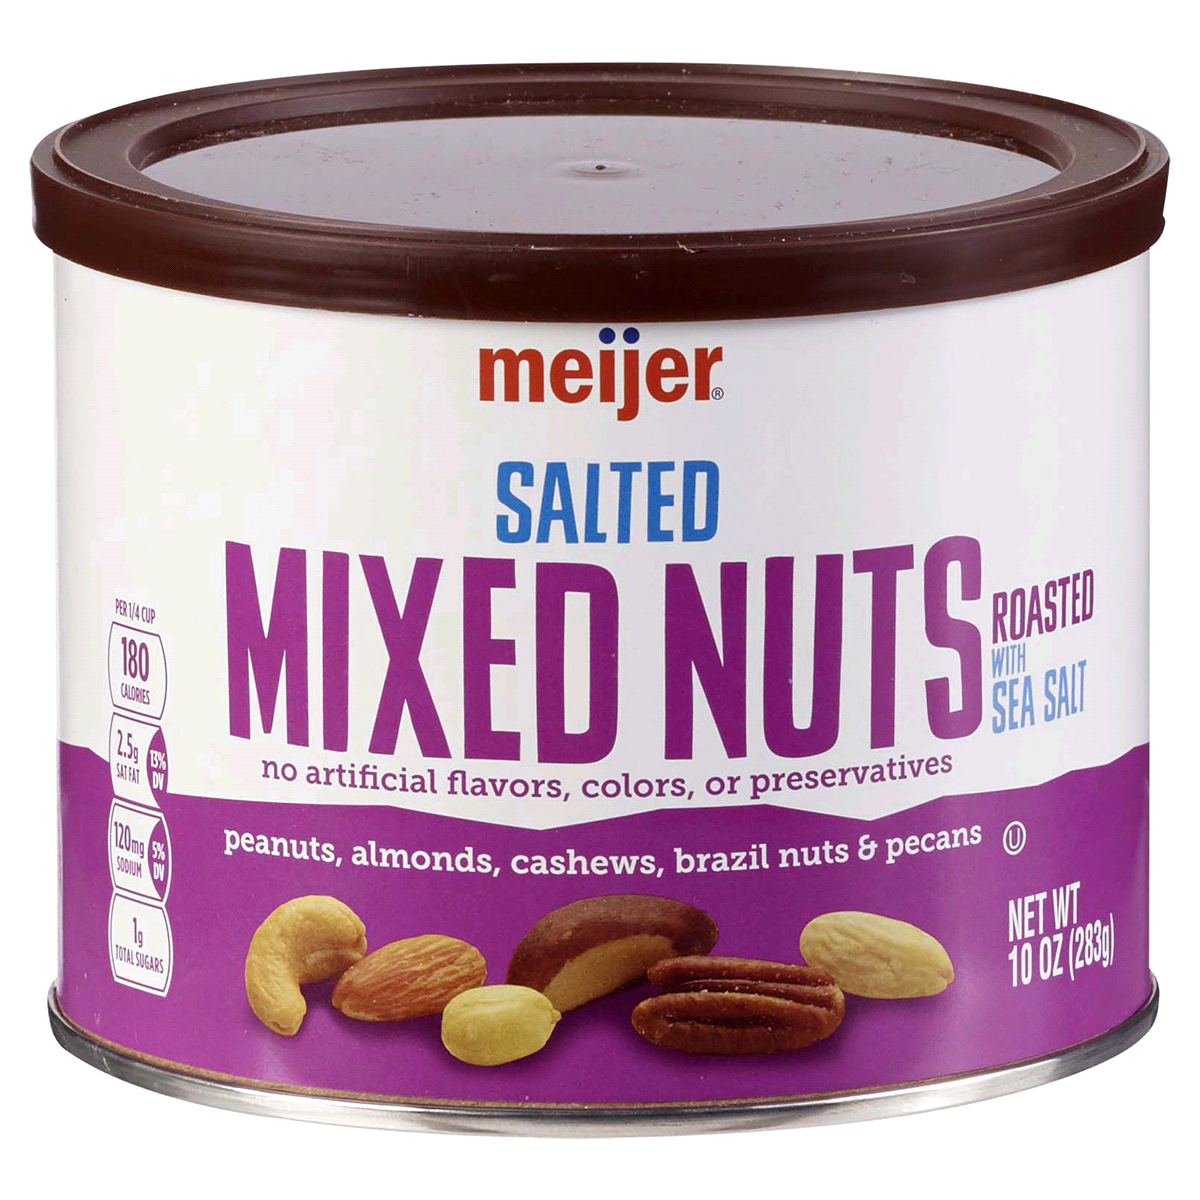 slide 1 of 2, Meijer Salted Mixed Nuts, 10 oz